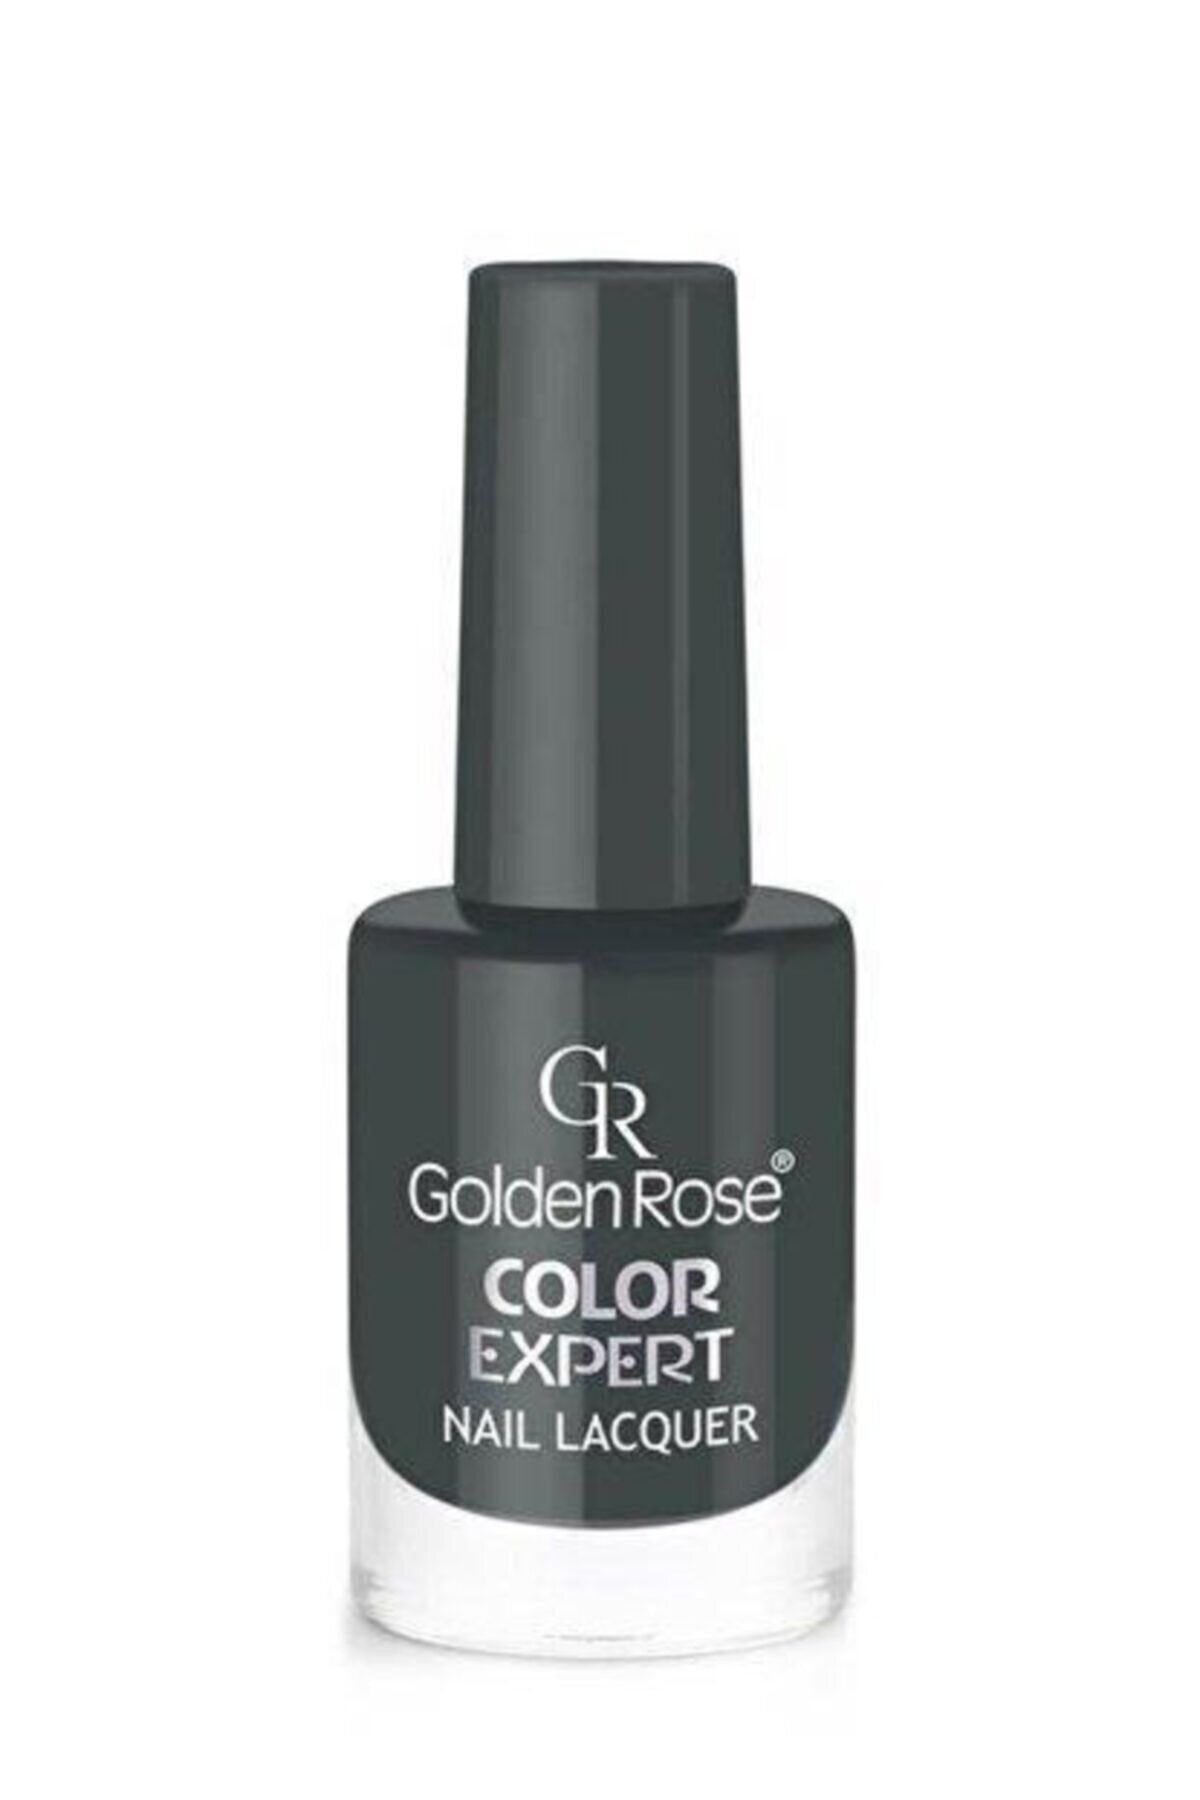 Golden Rose Color Expert Nail Lacquer Oje No:90 Std